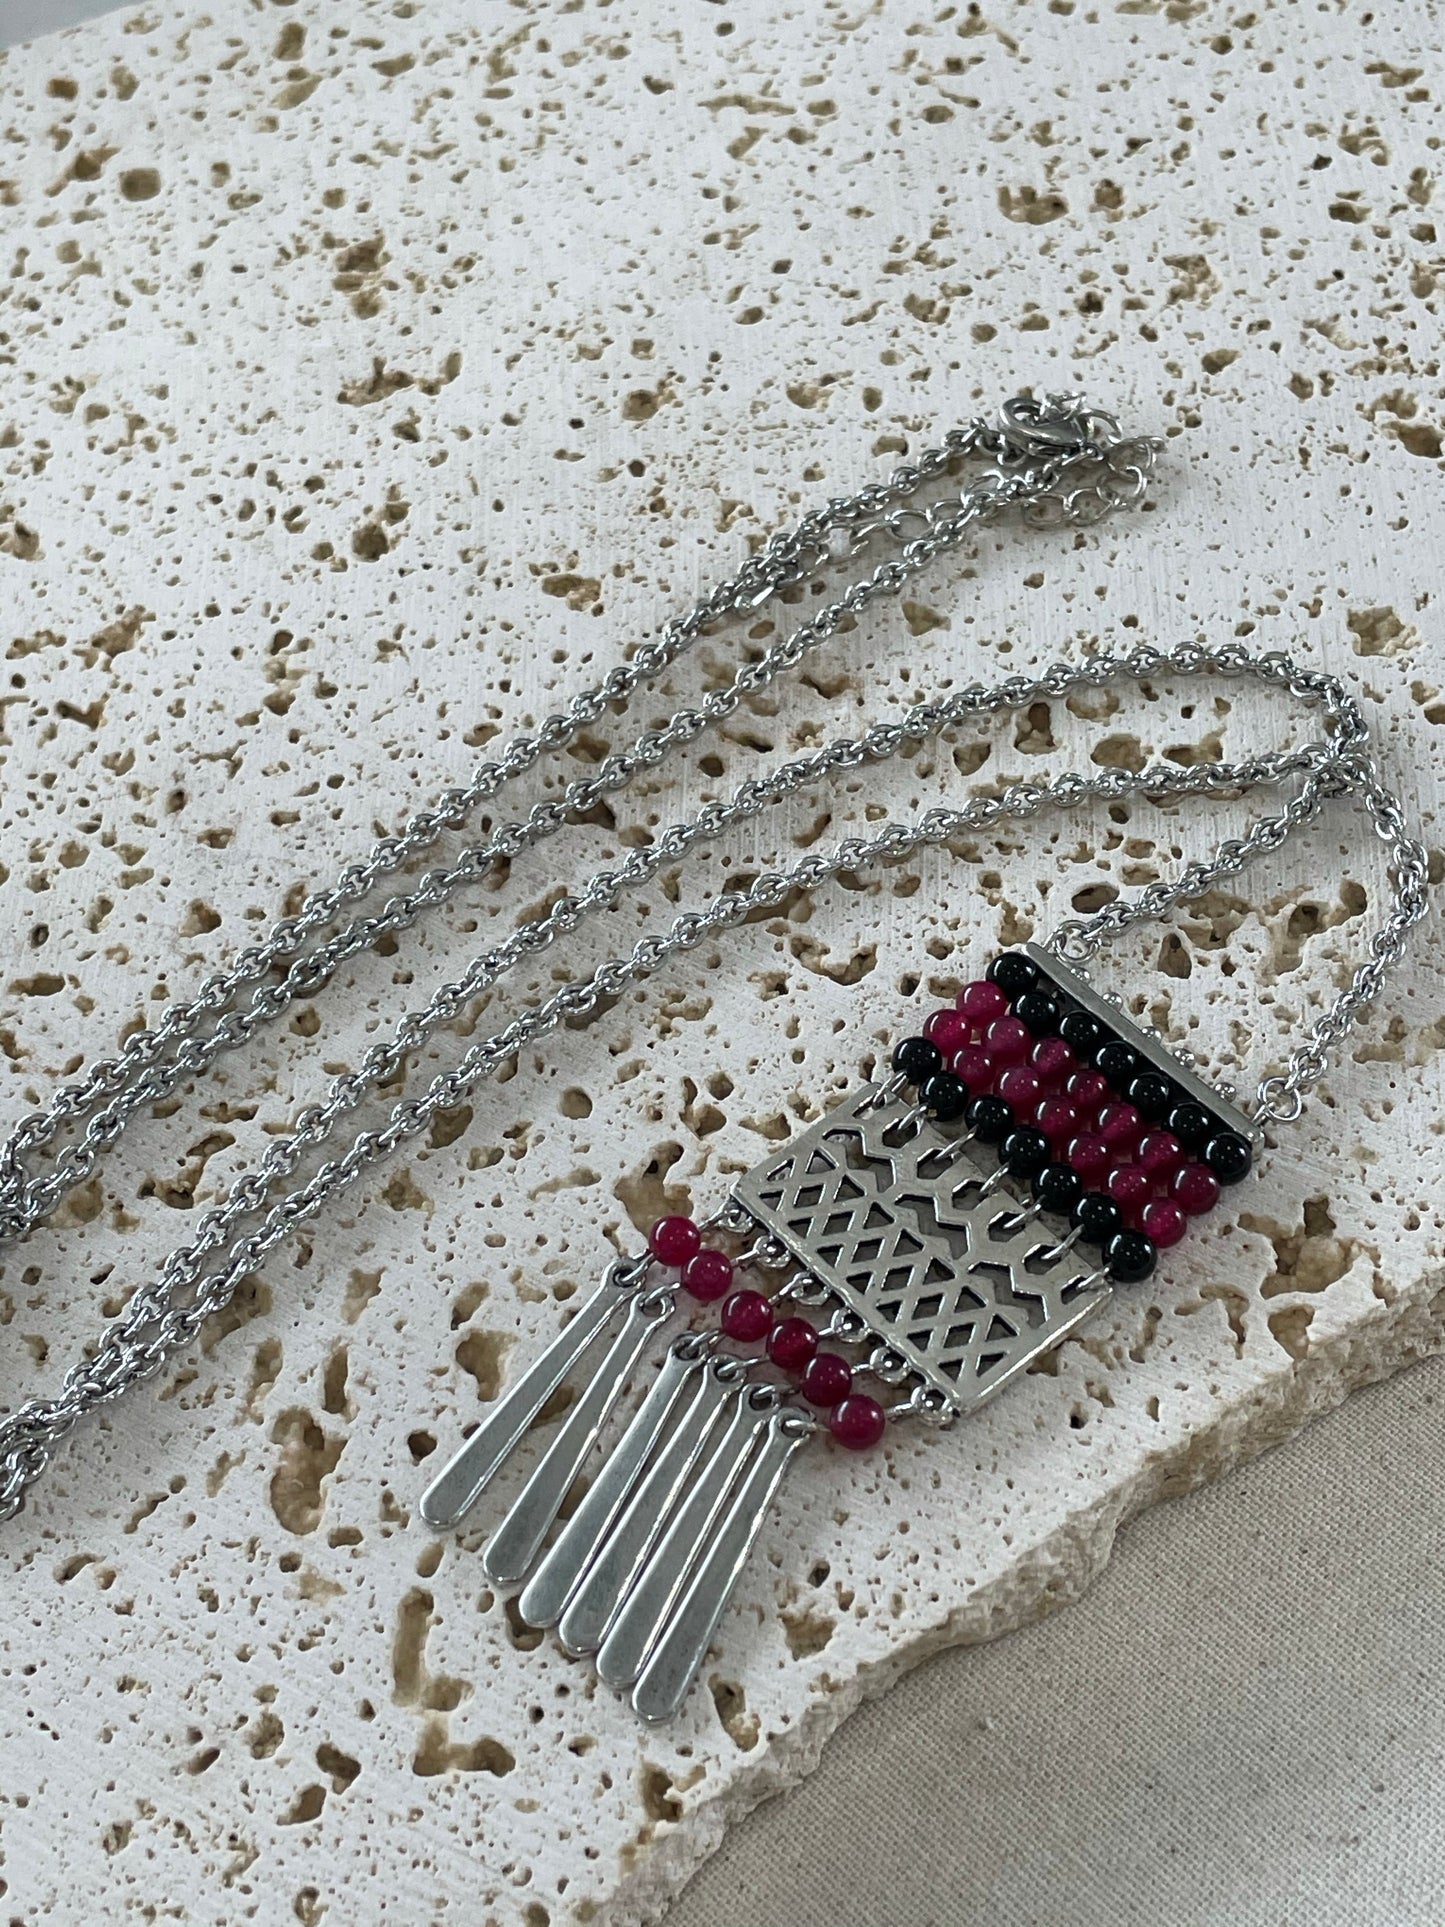 Red and black beads pendant on long silver necklace